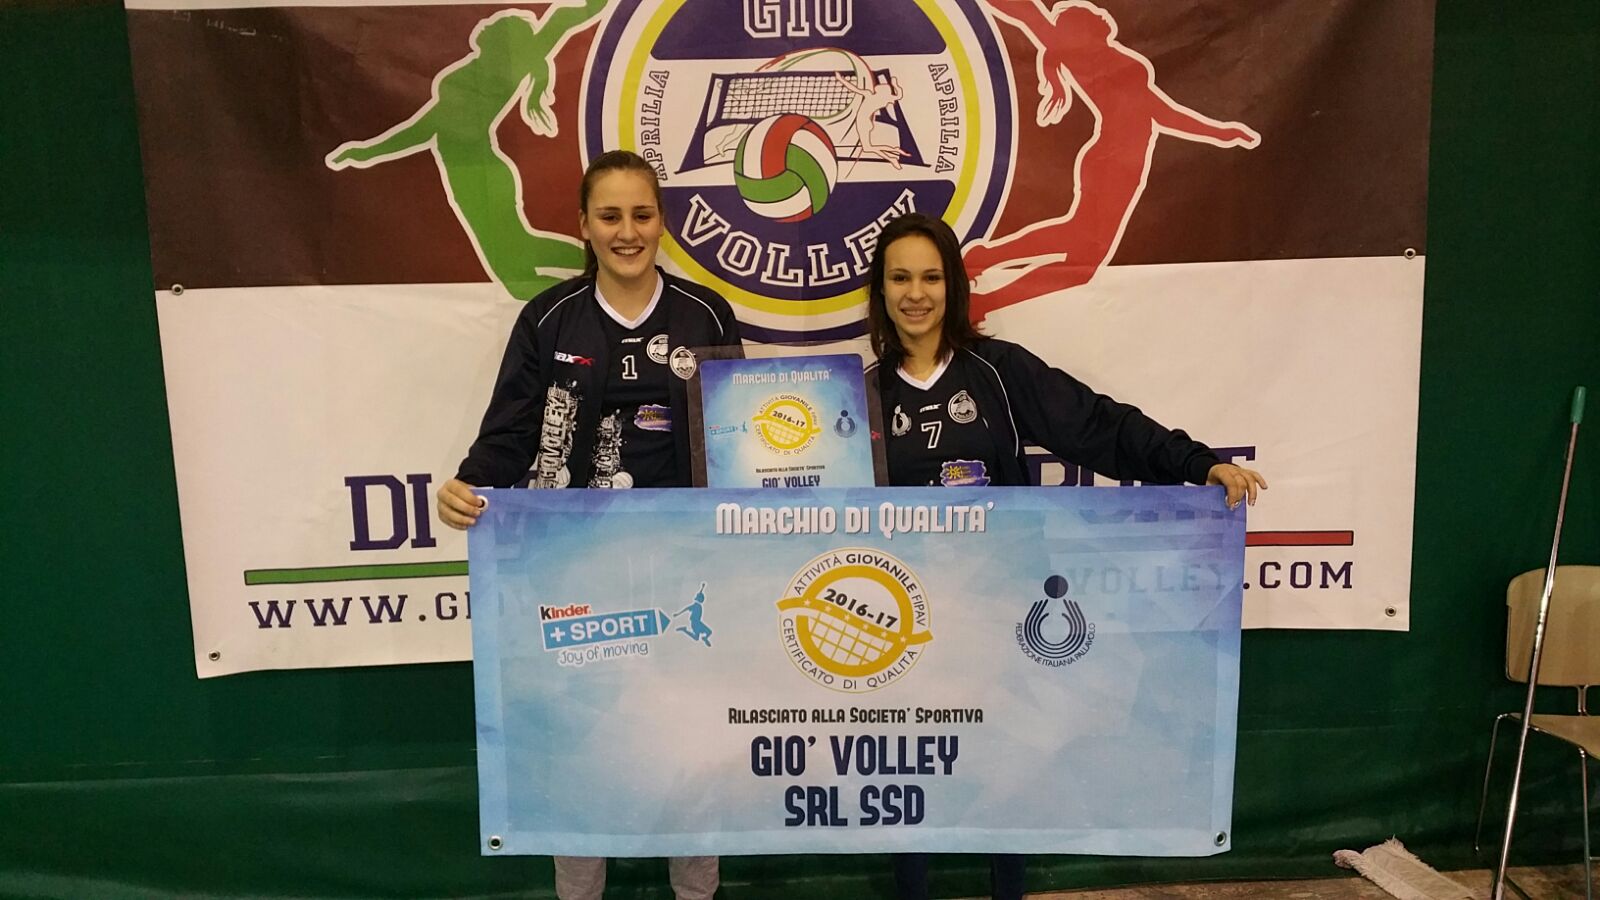 Giò Volley Marchio 2